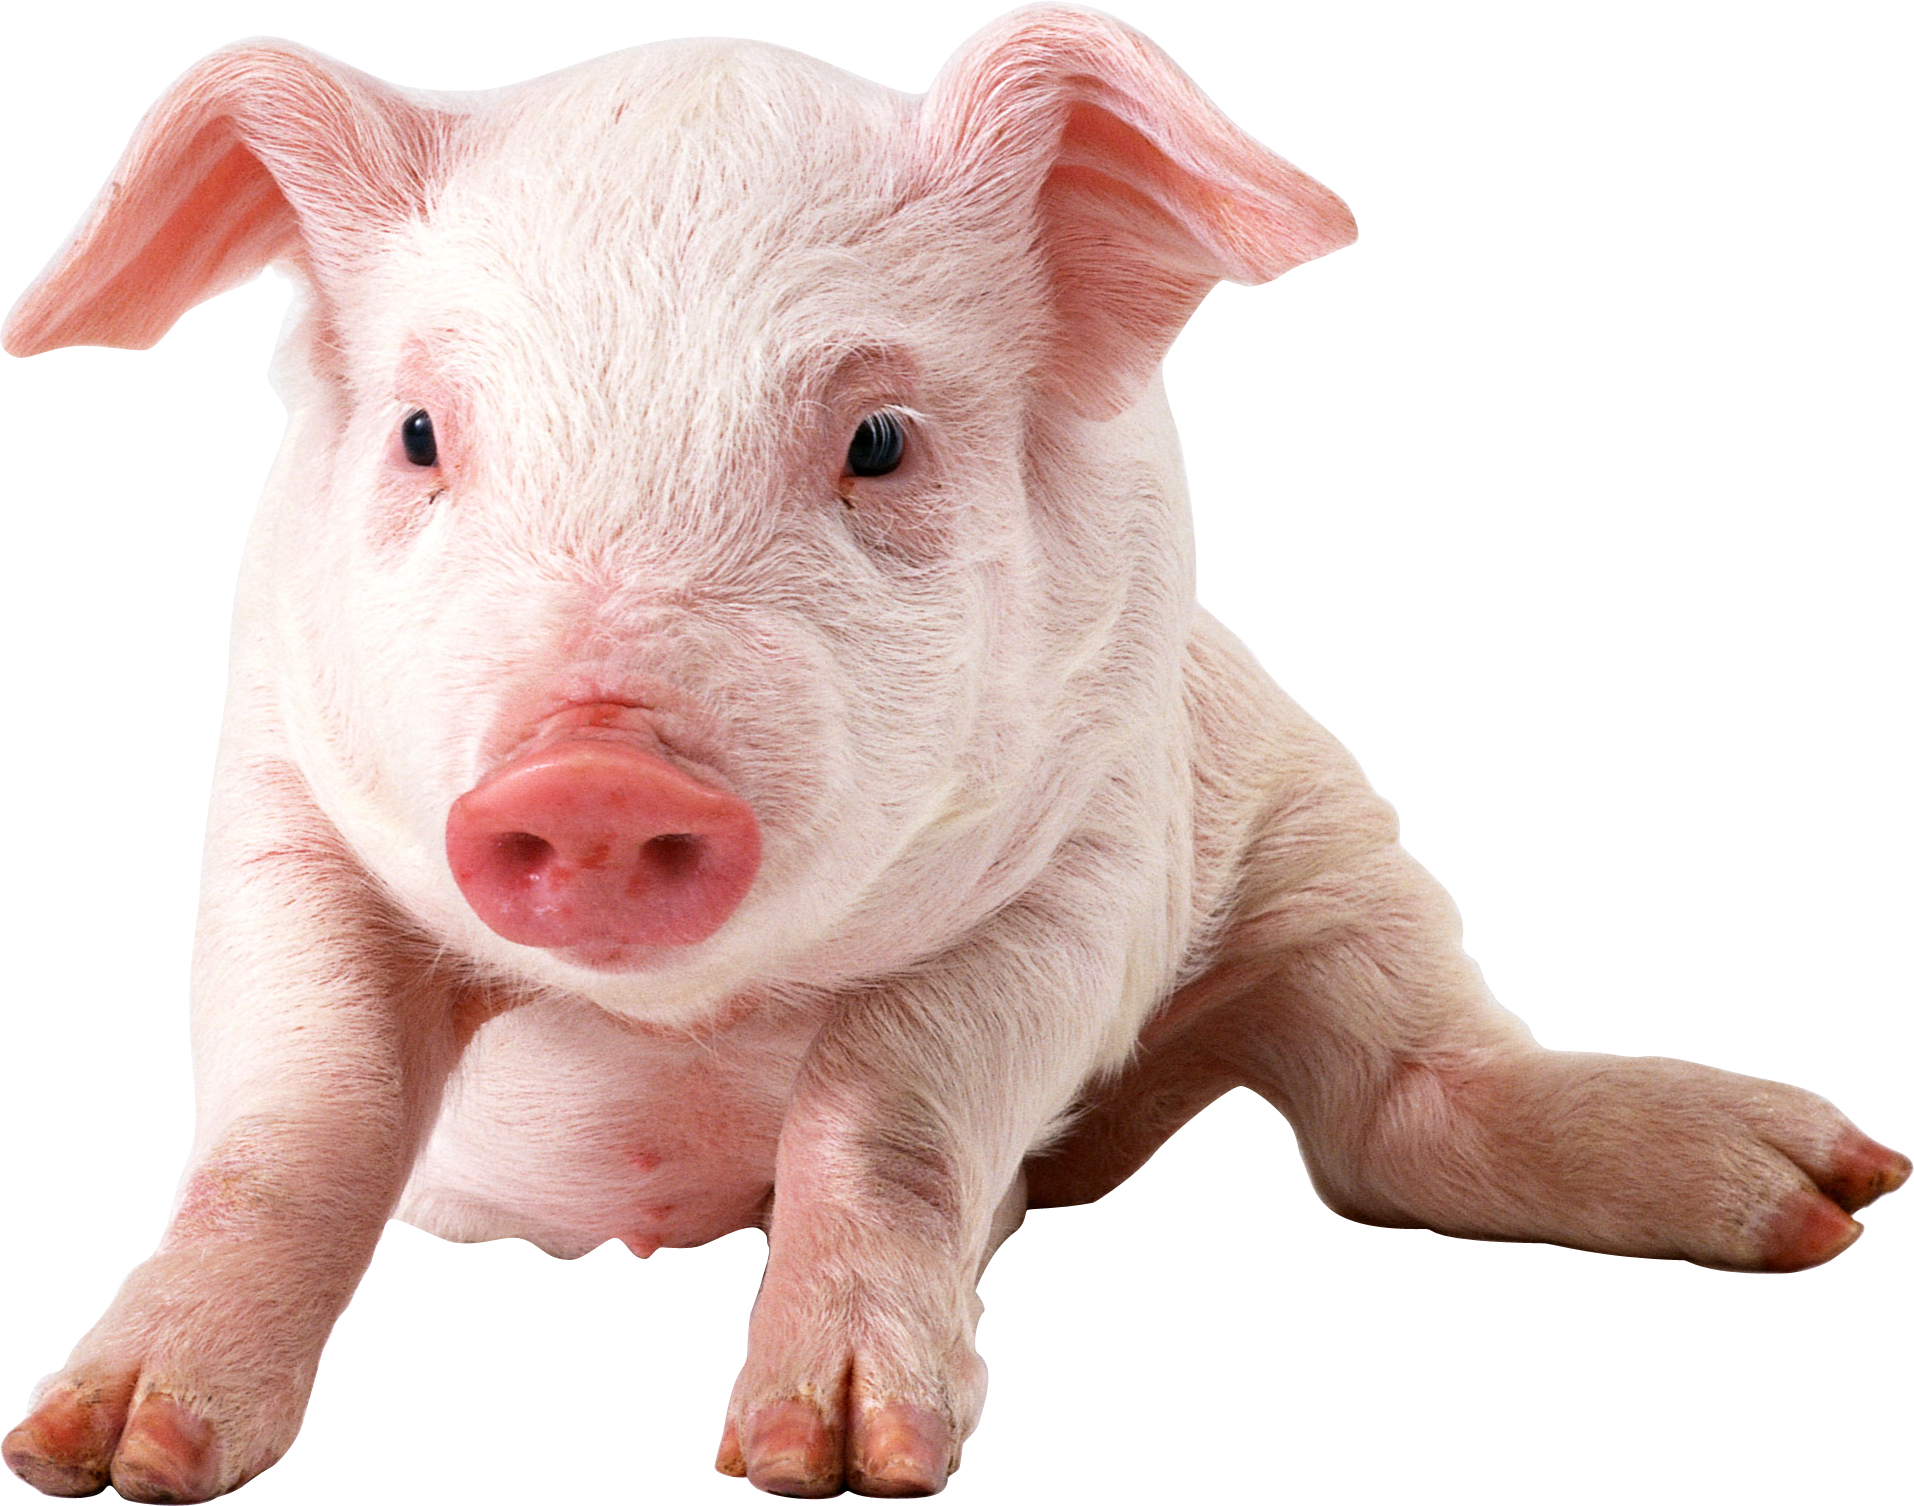 Pig Face PNG HD - 124006